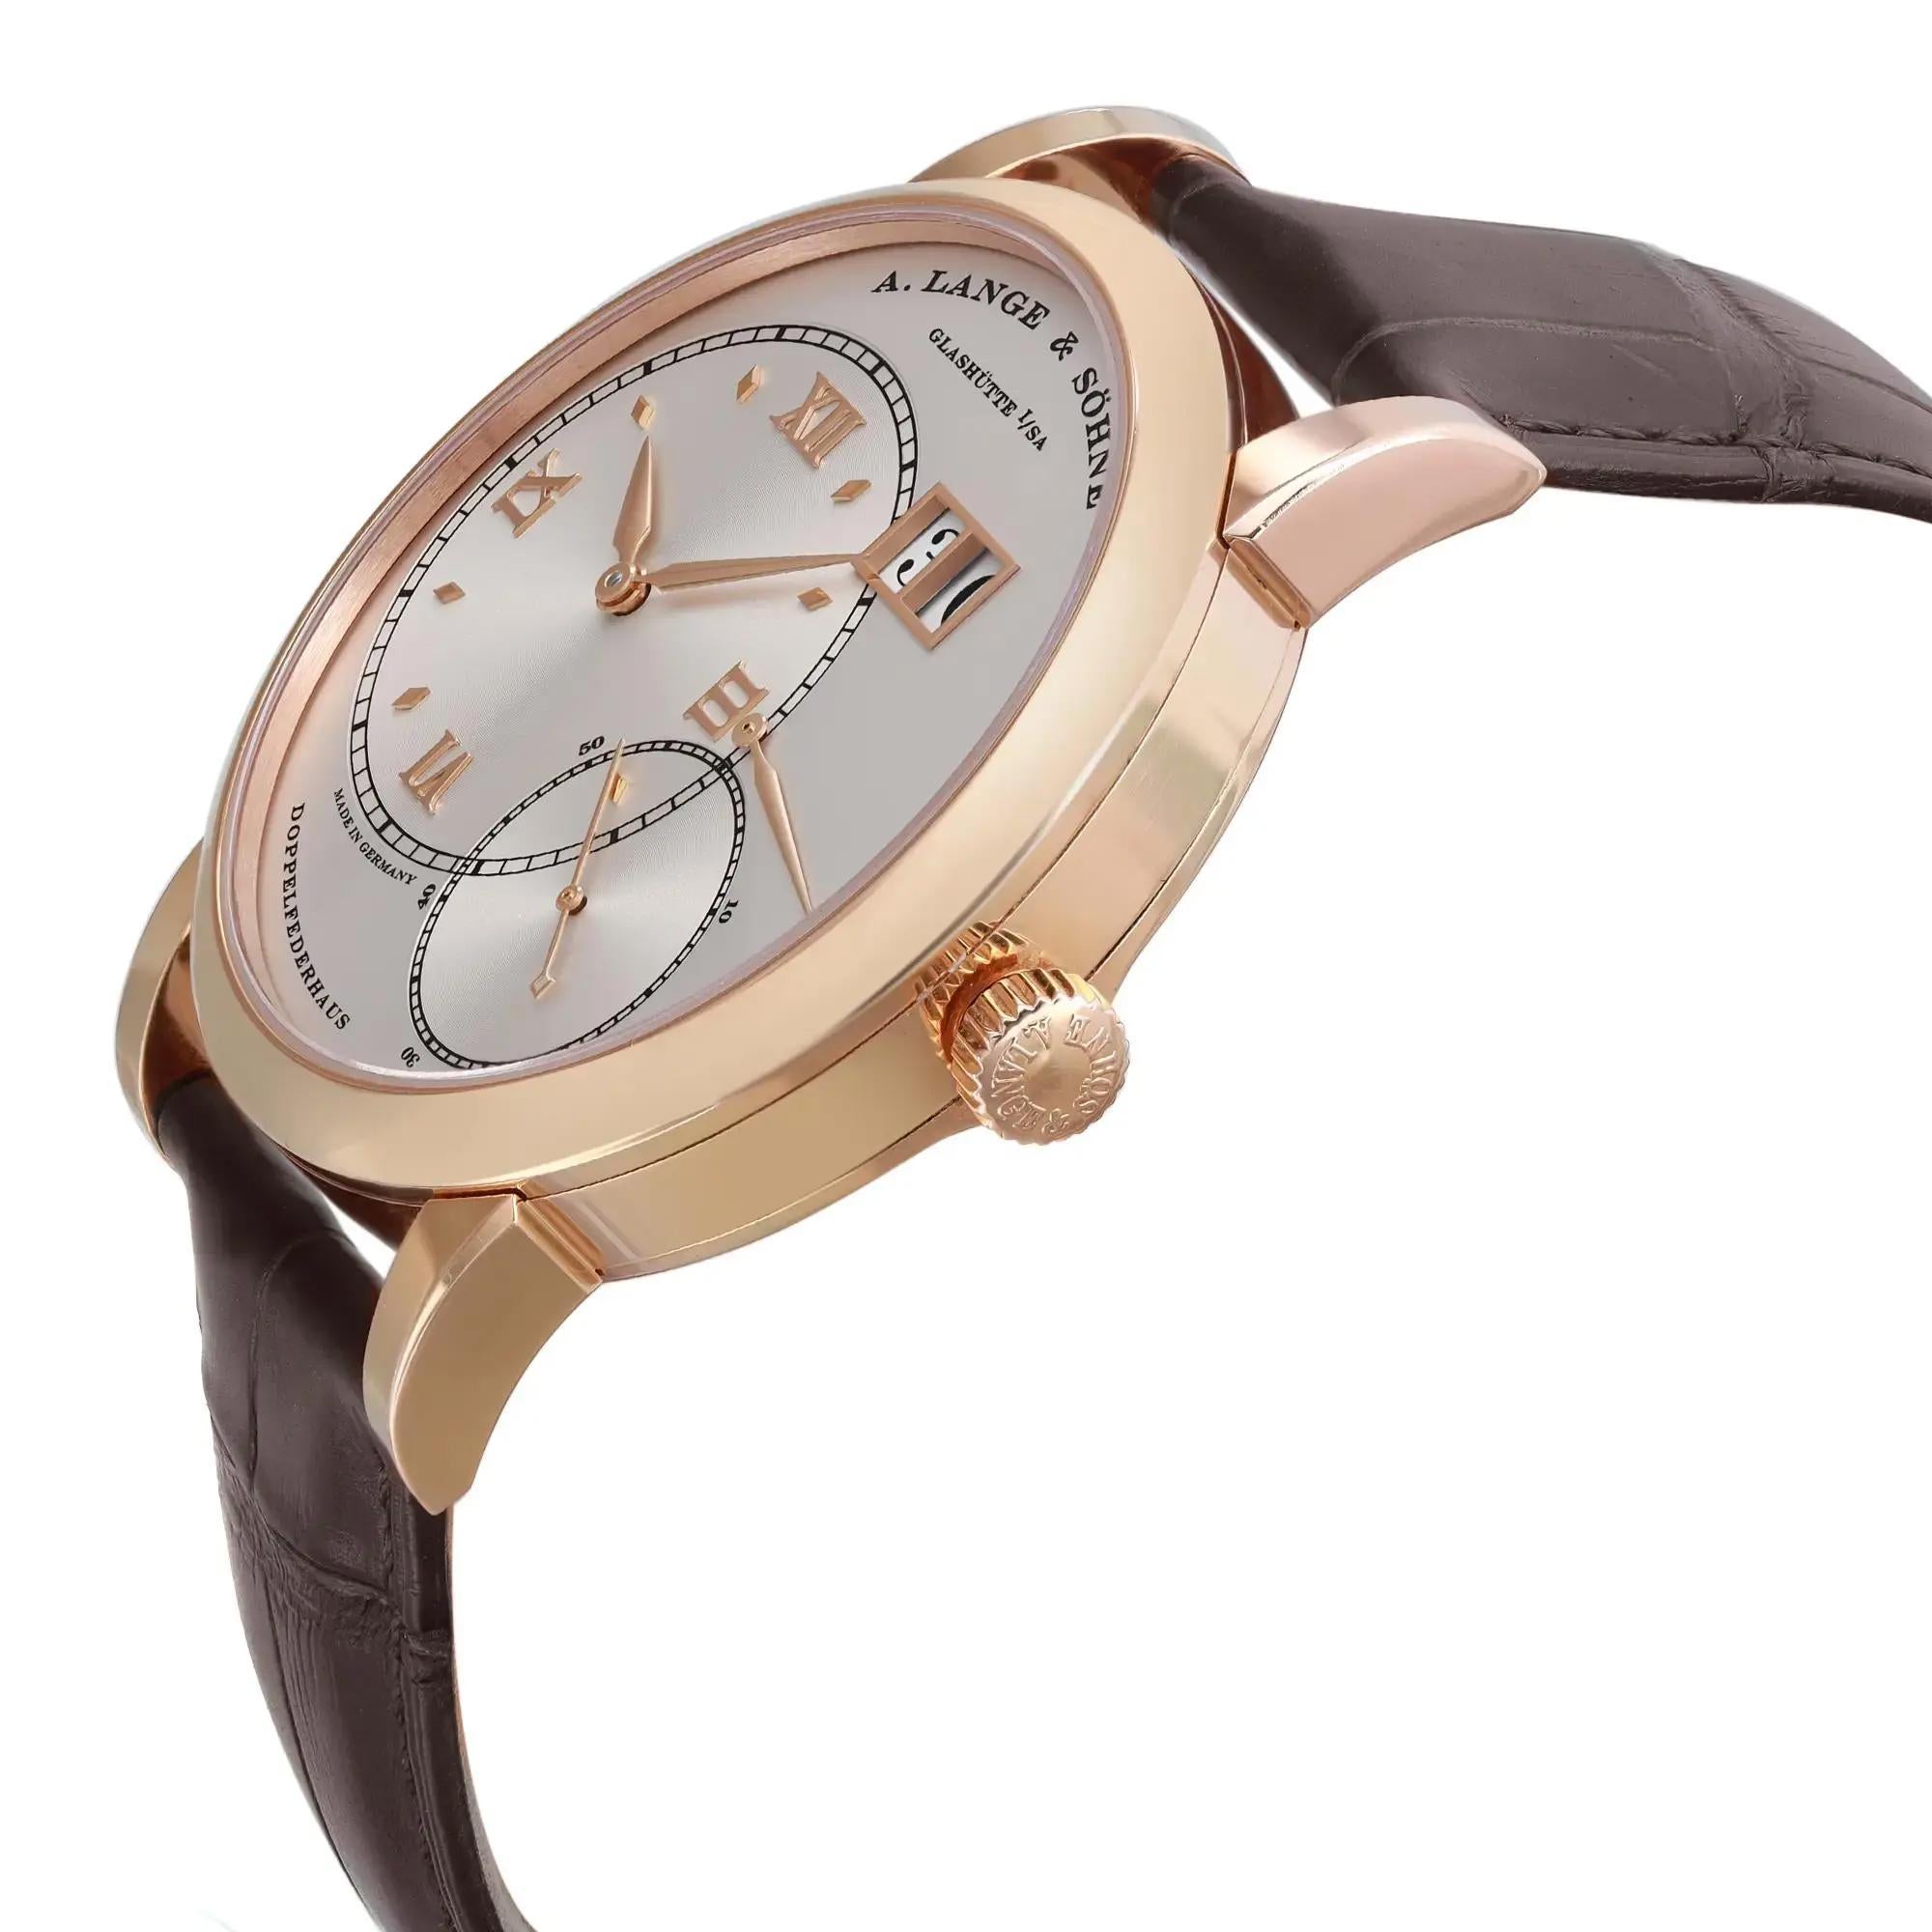 A. Lange & Sohne Grand Lange 1 42mm Rose Gold Hand Wind Watch 115.032/LS1154AD In Good Condition For Sale In New York, NY